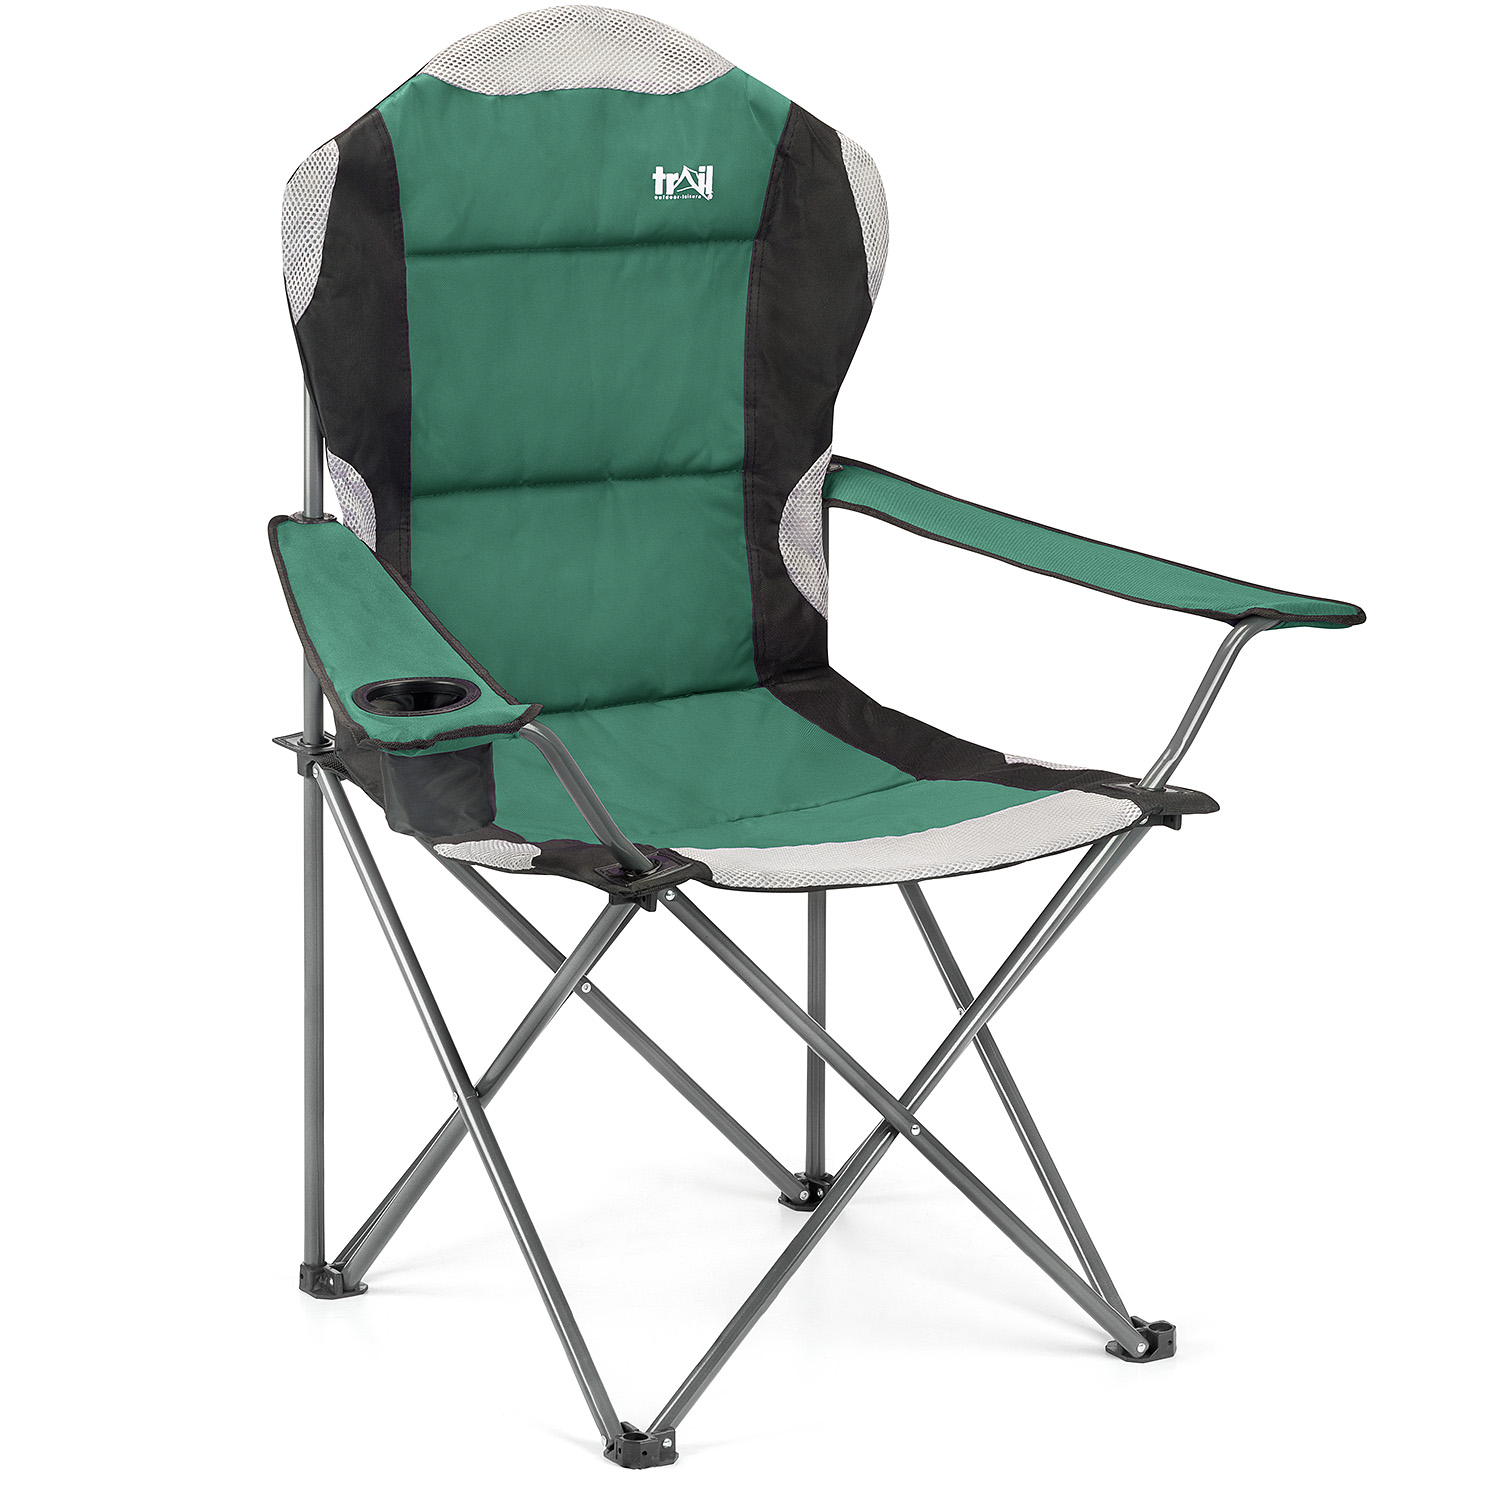 Portable Folding Camping Chairs Heavy Duty Luxury Padded Outdoor Fishing Seat 